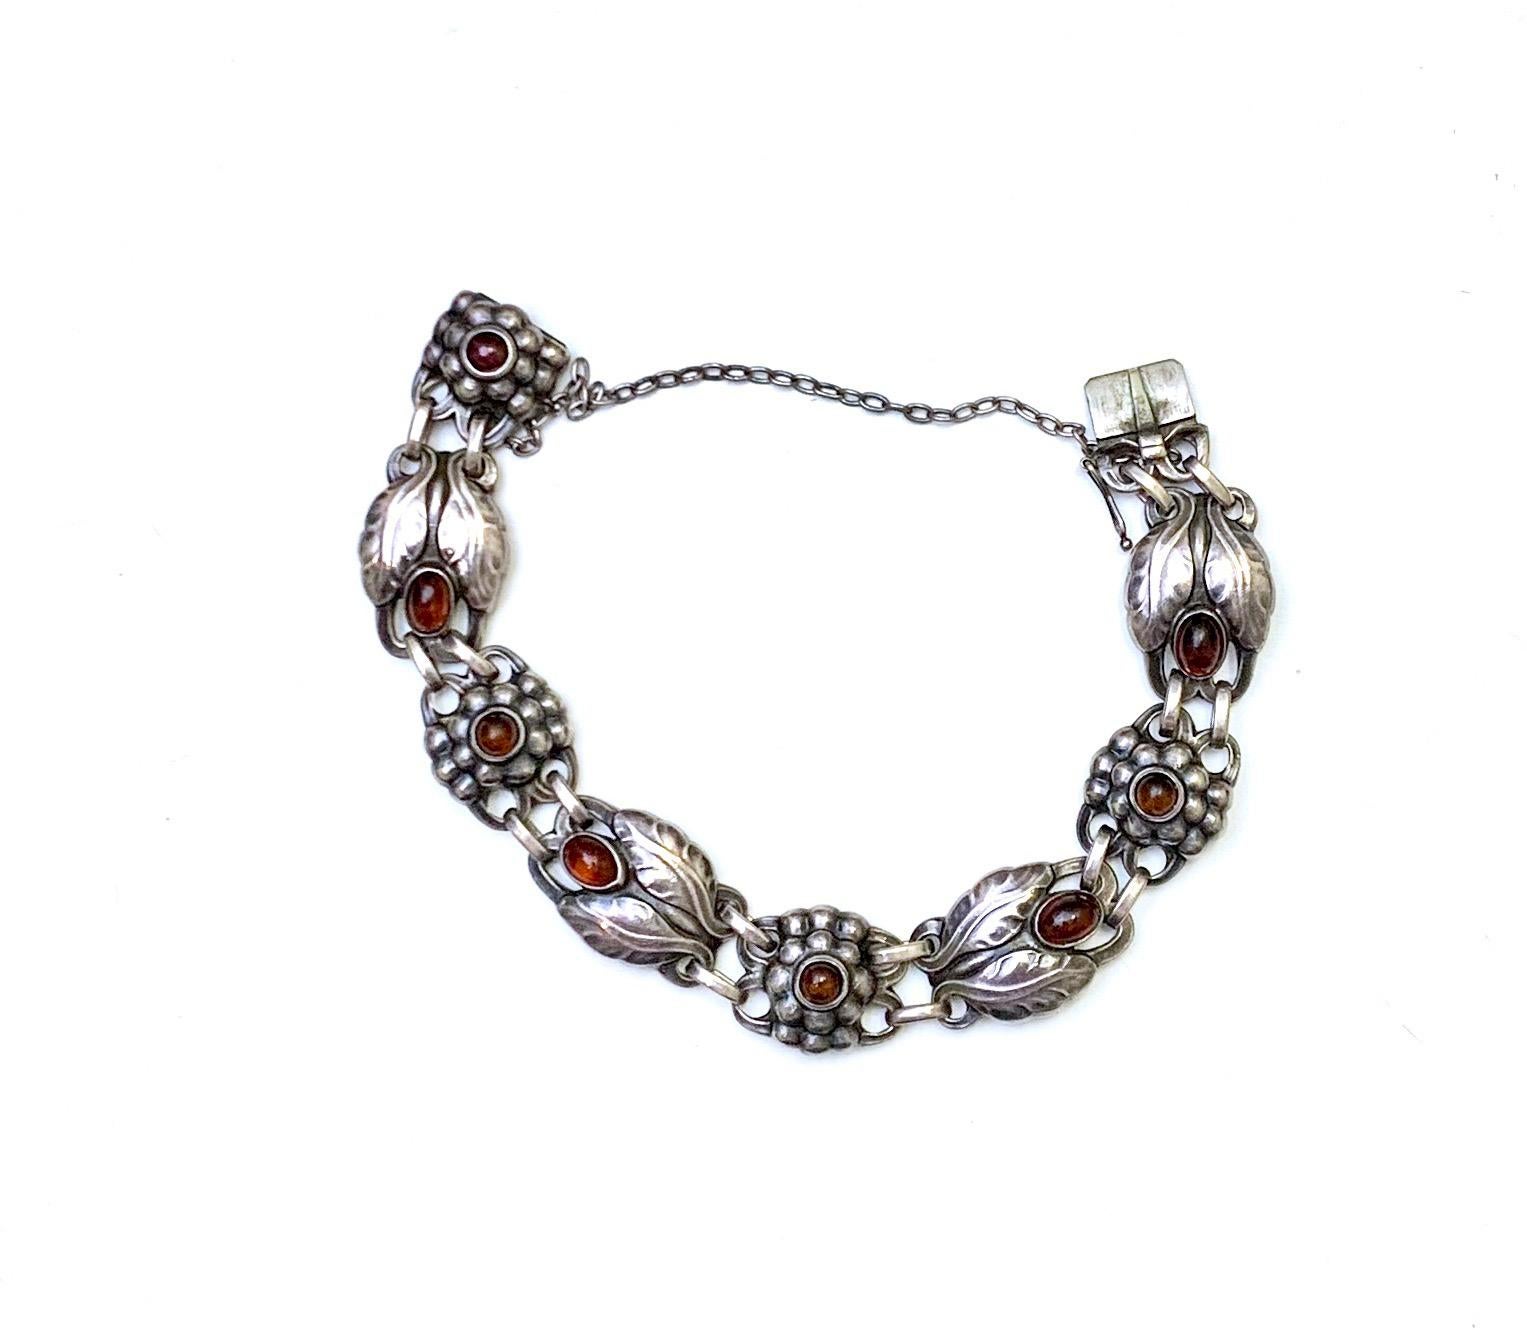 This well crafted Georg Jensen signed silver and amber bracelet is a great piece for any silver jewelry collector.  The bracelet measures 7